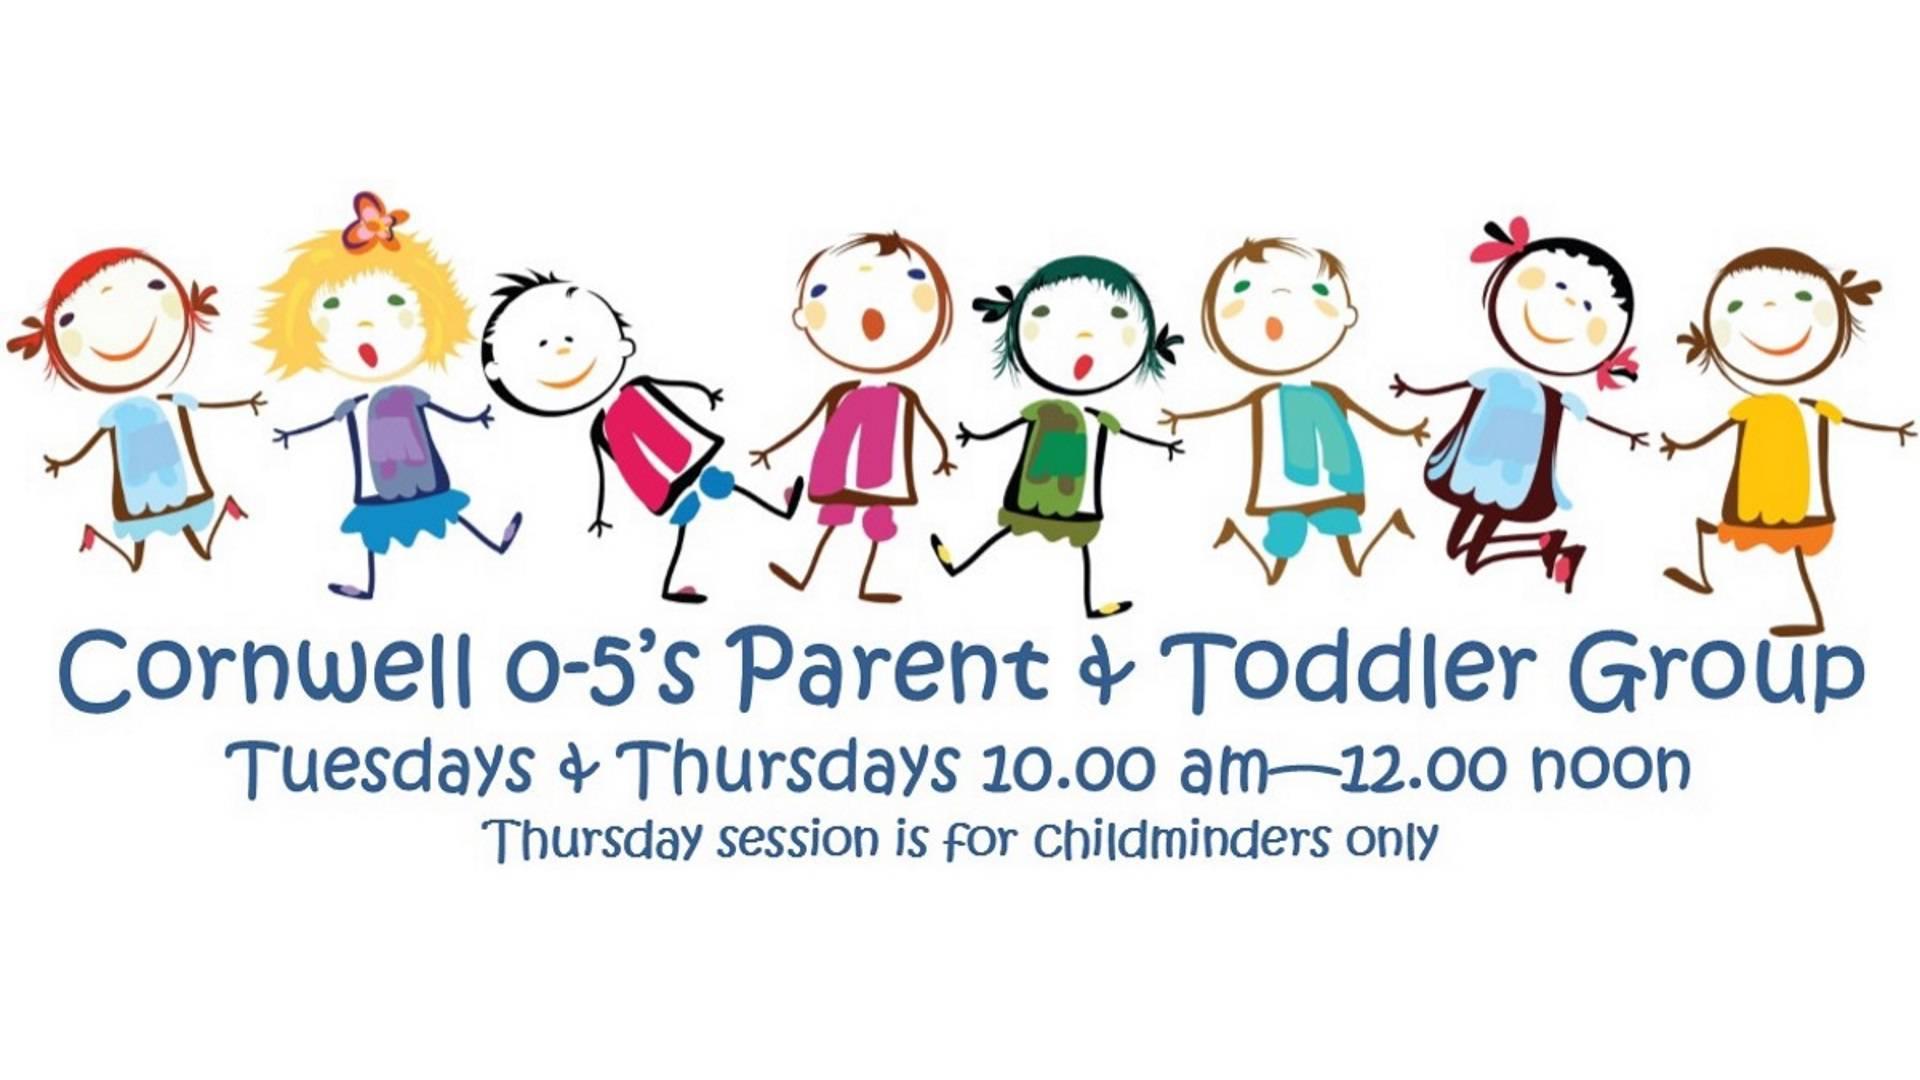 Cornwell 0-5s Parent and Toddler Group photo